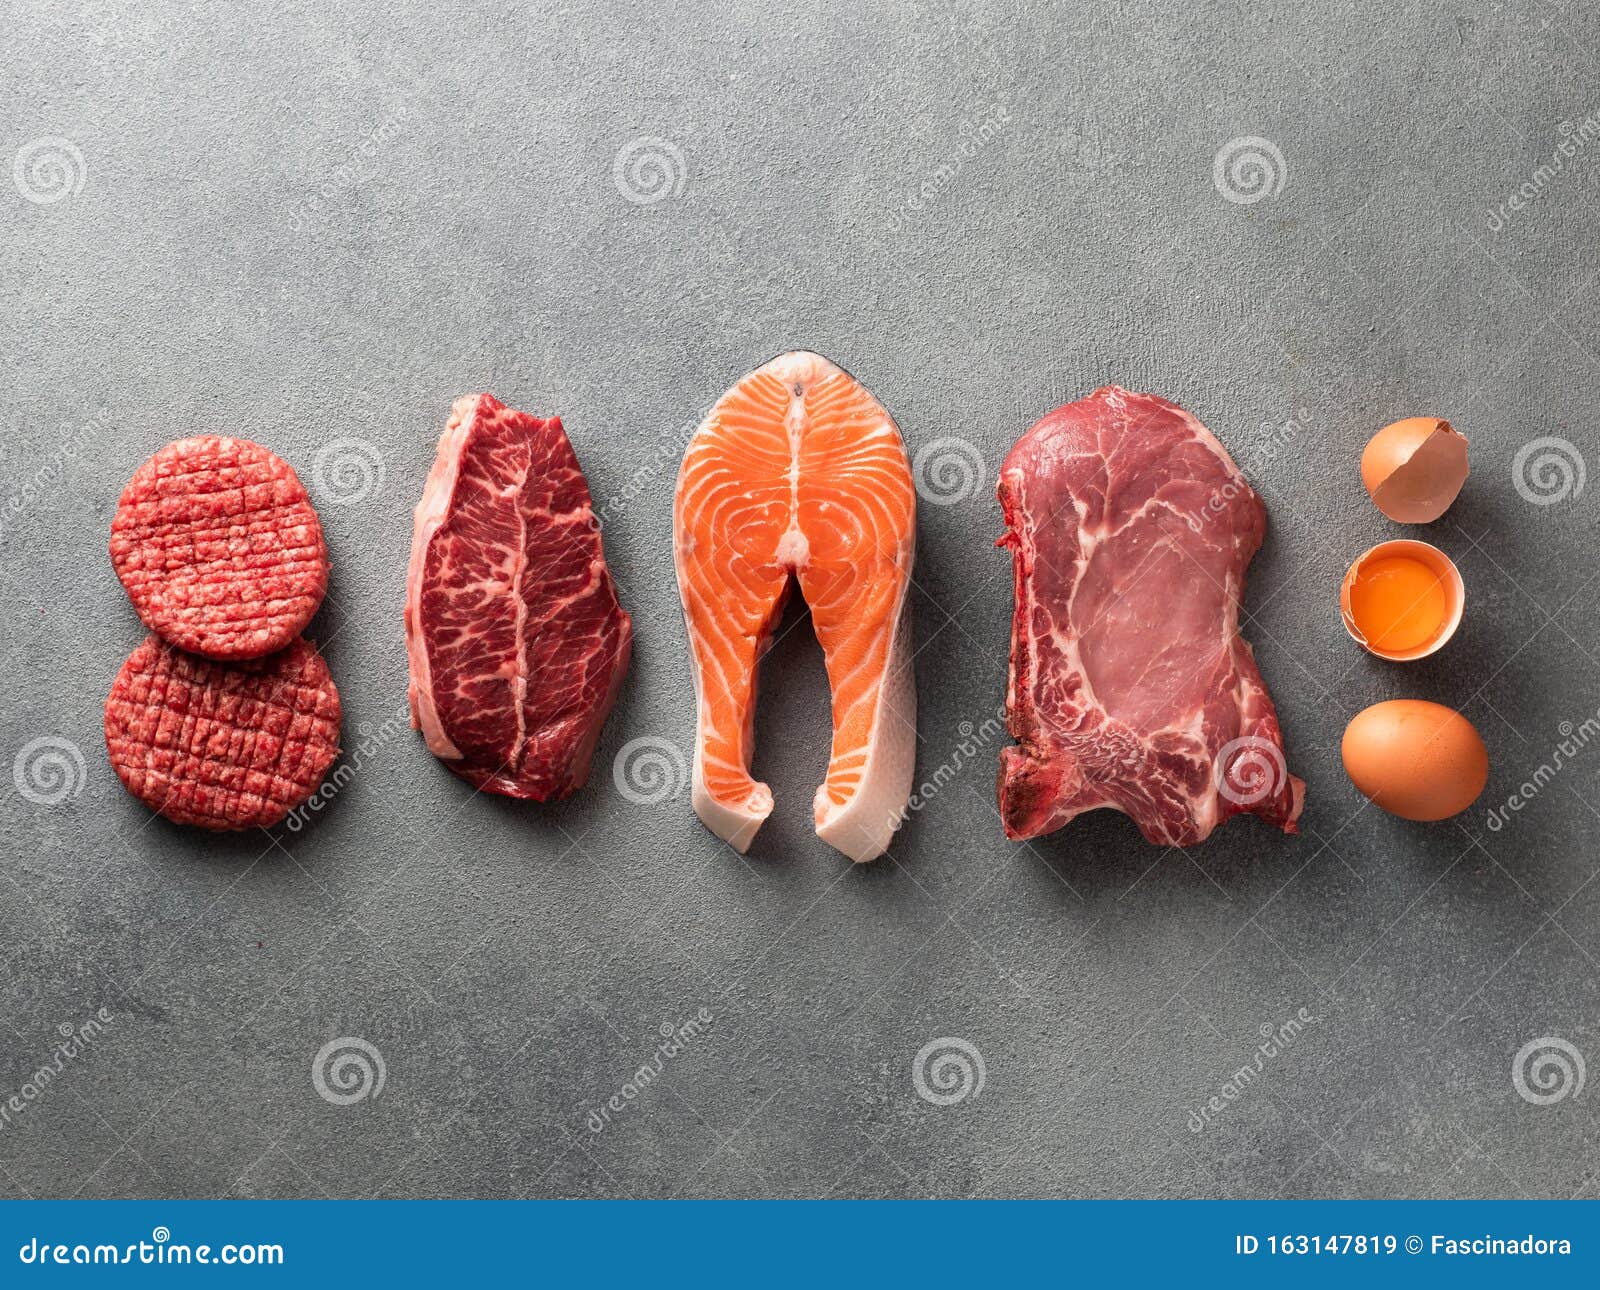 carnivore or keto diet, zero or low carb concept, top view